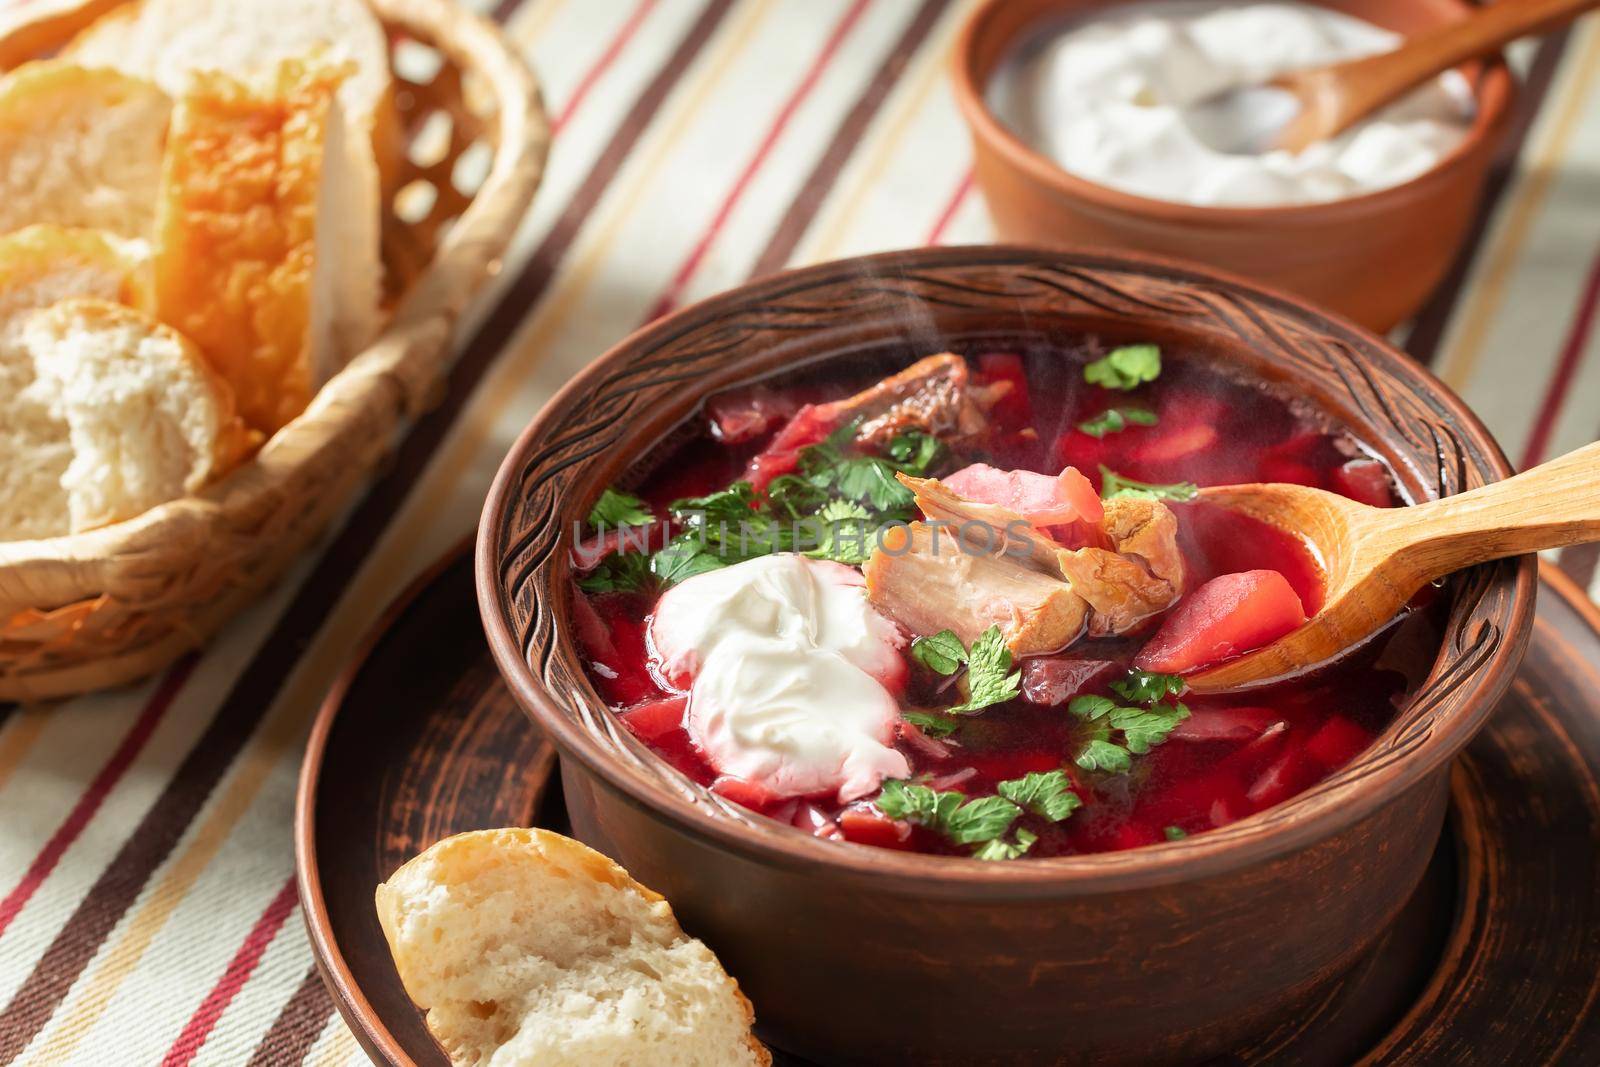 Freshly cooked hot homemade borscht - traditional dish of Russian and Ukrainian cuisine in earthenware dishes with bacon, bread, sour cream and garlic by galsand